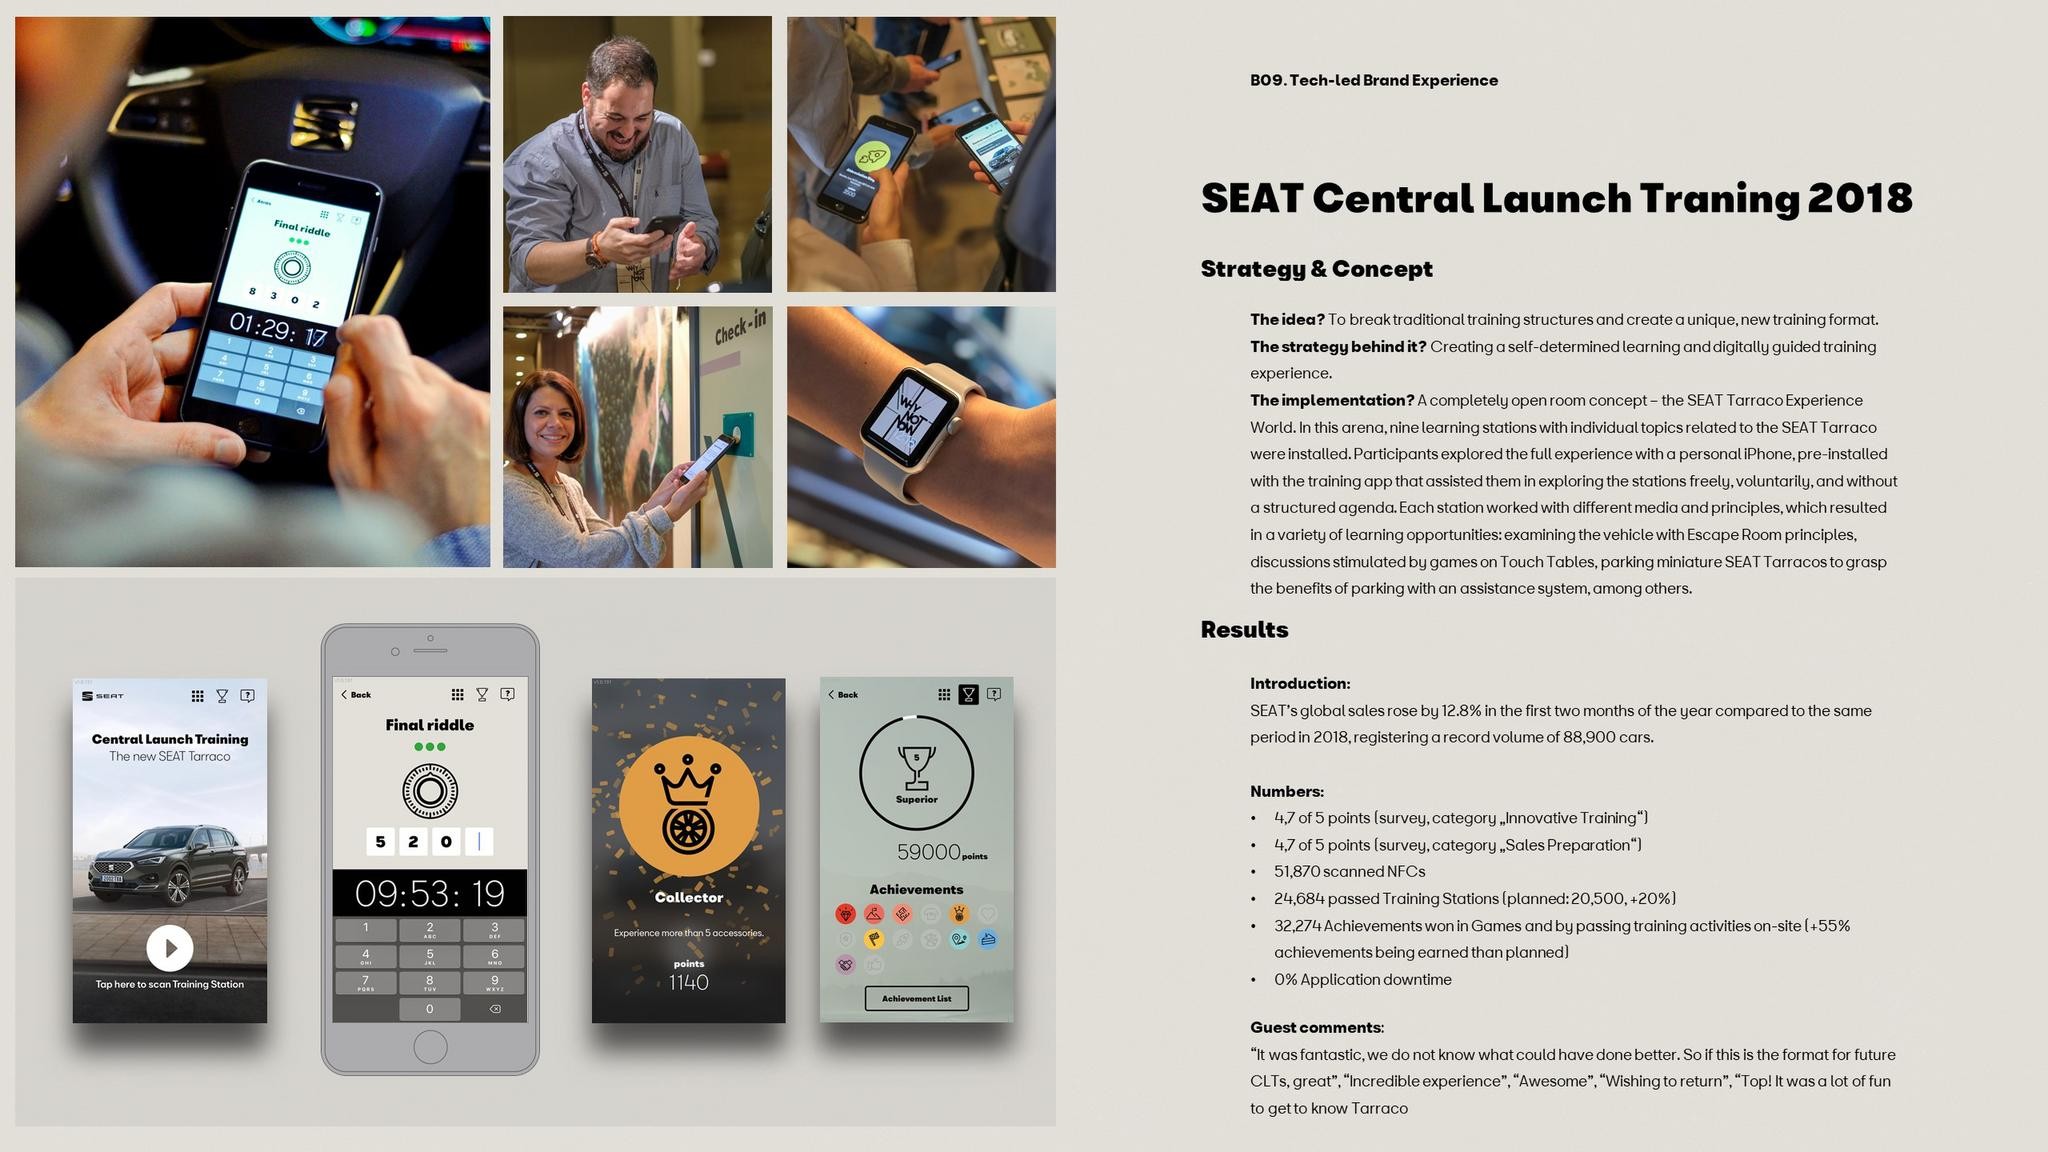 SEAT Central Launch Training 2018